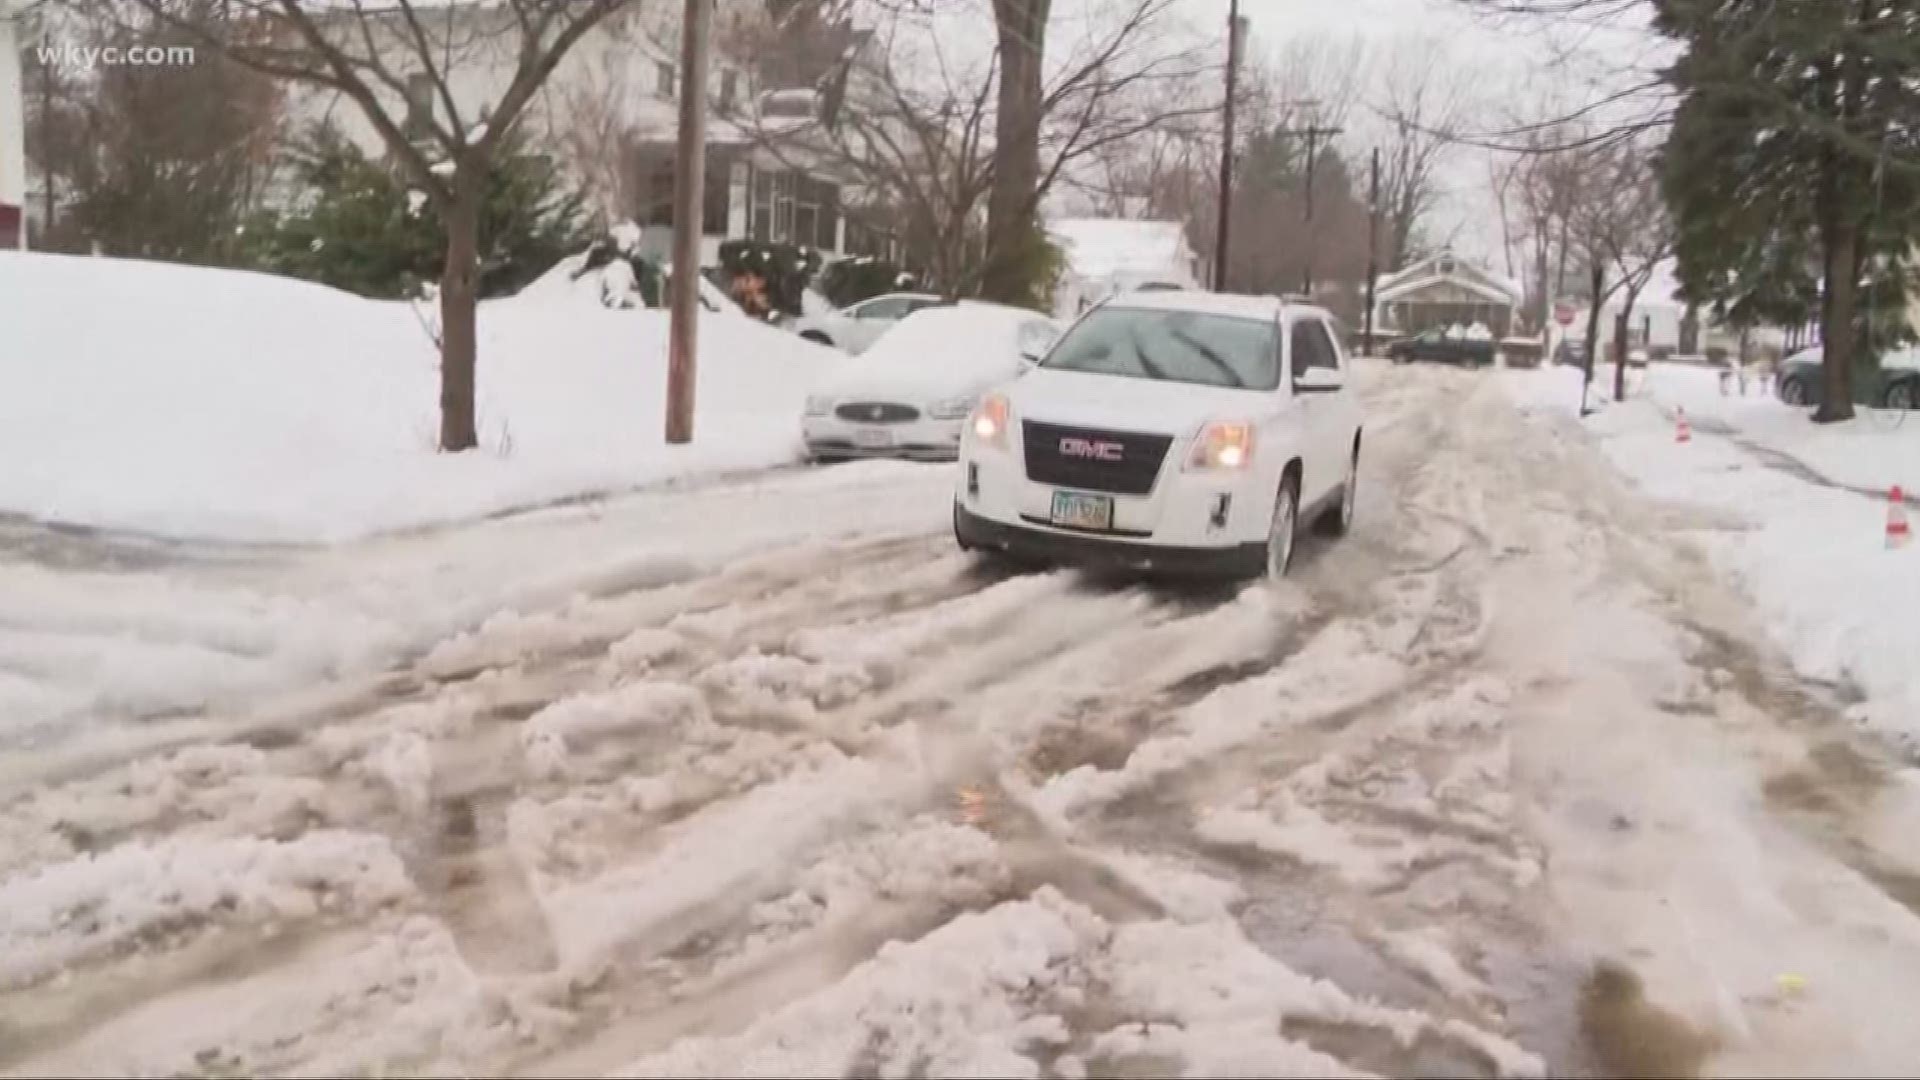 Unplowed streets have left many residents fuming.